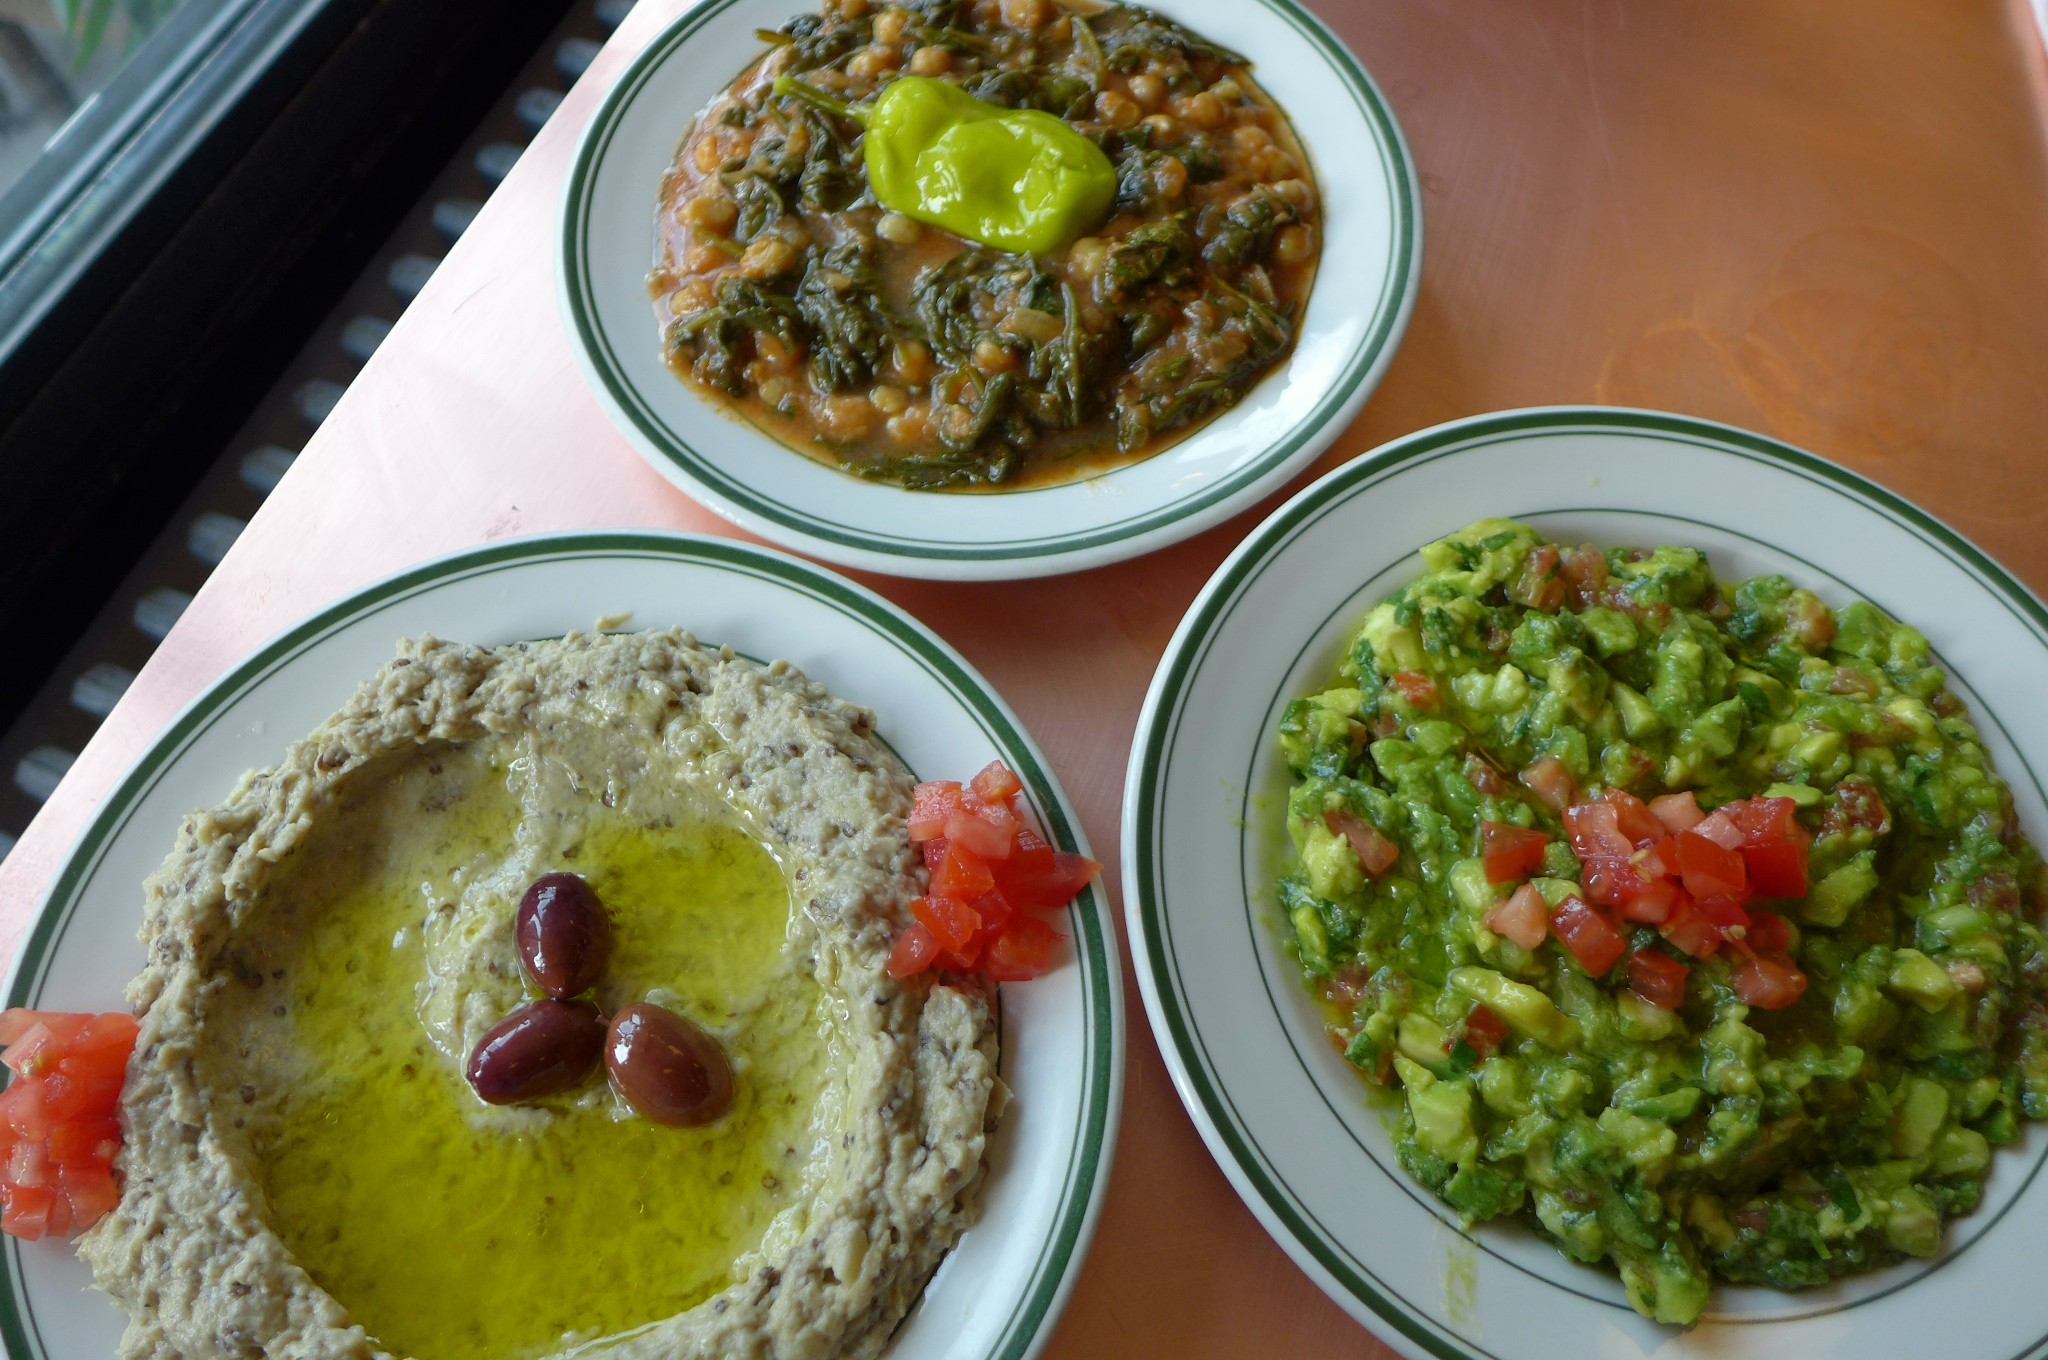 Three plates of babaghanoush, beans and spinach, and minced avocado.